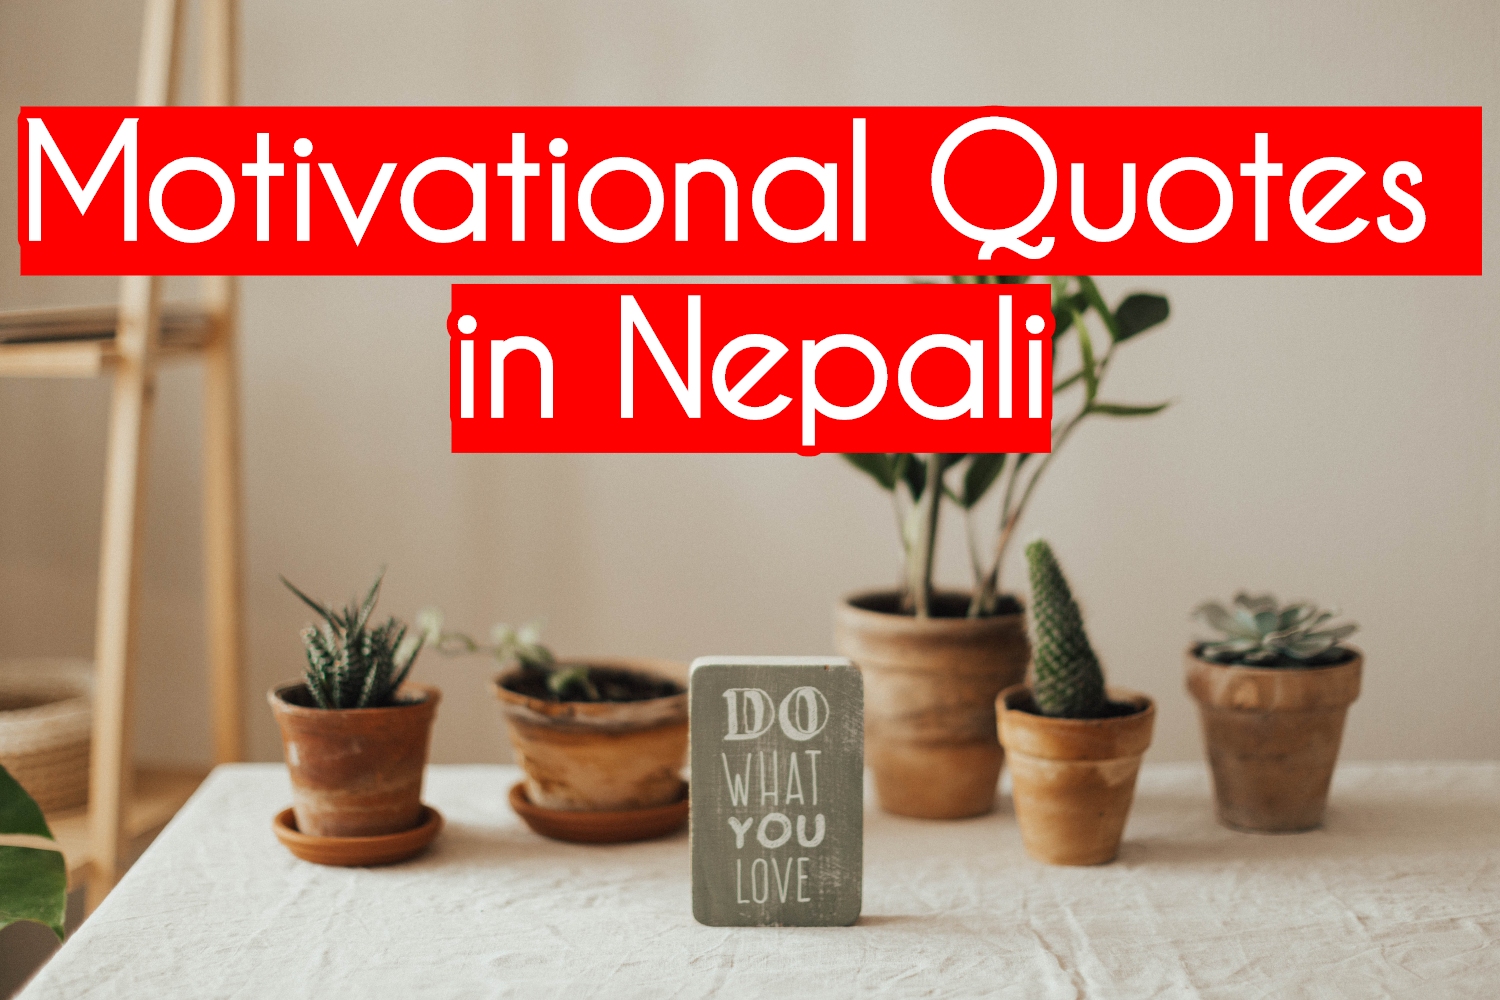 Motivational Quotes in Nepali - Quotes that will inspire you - Quotes